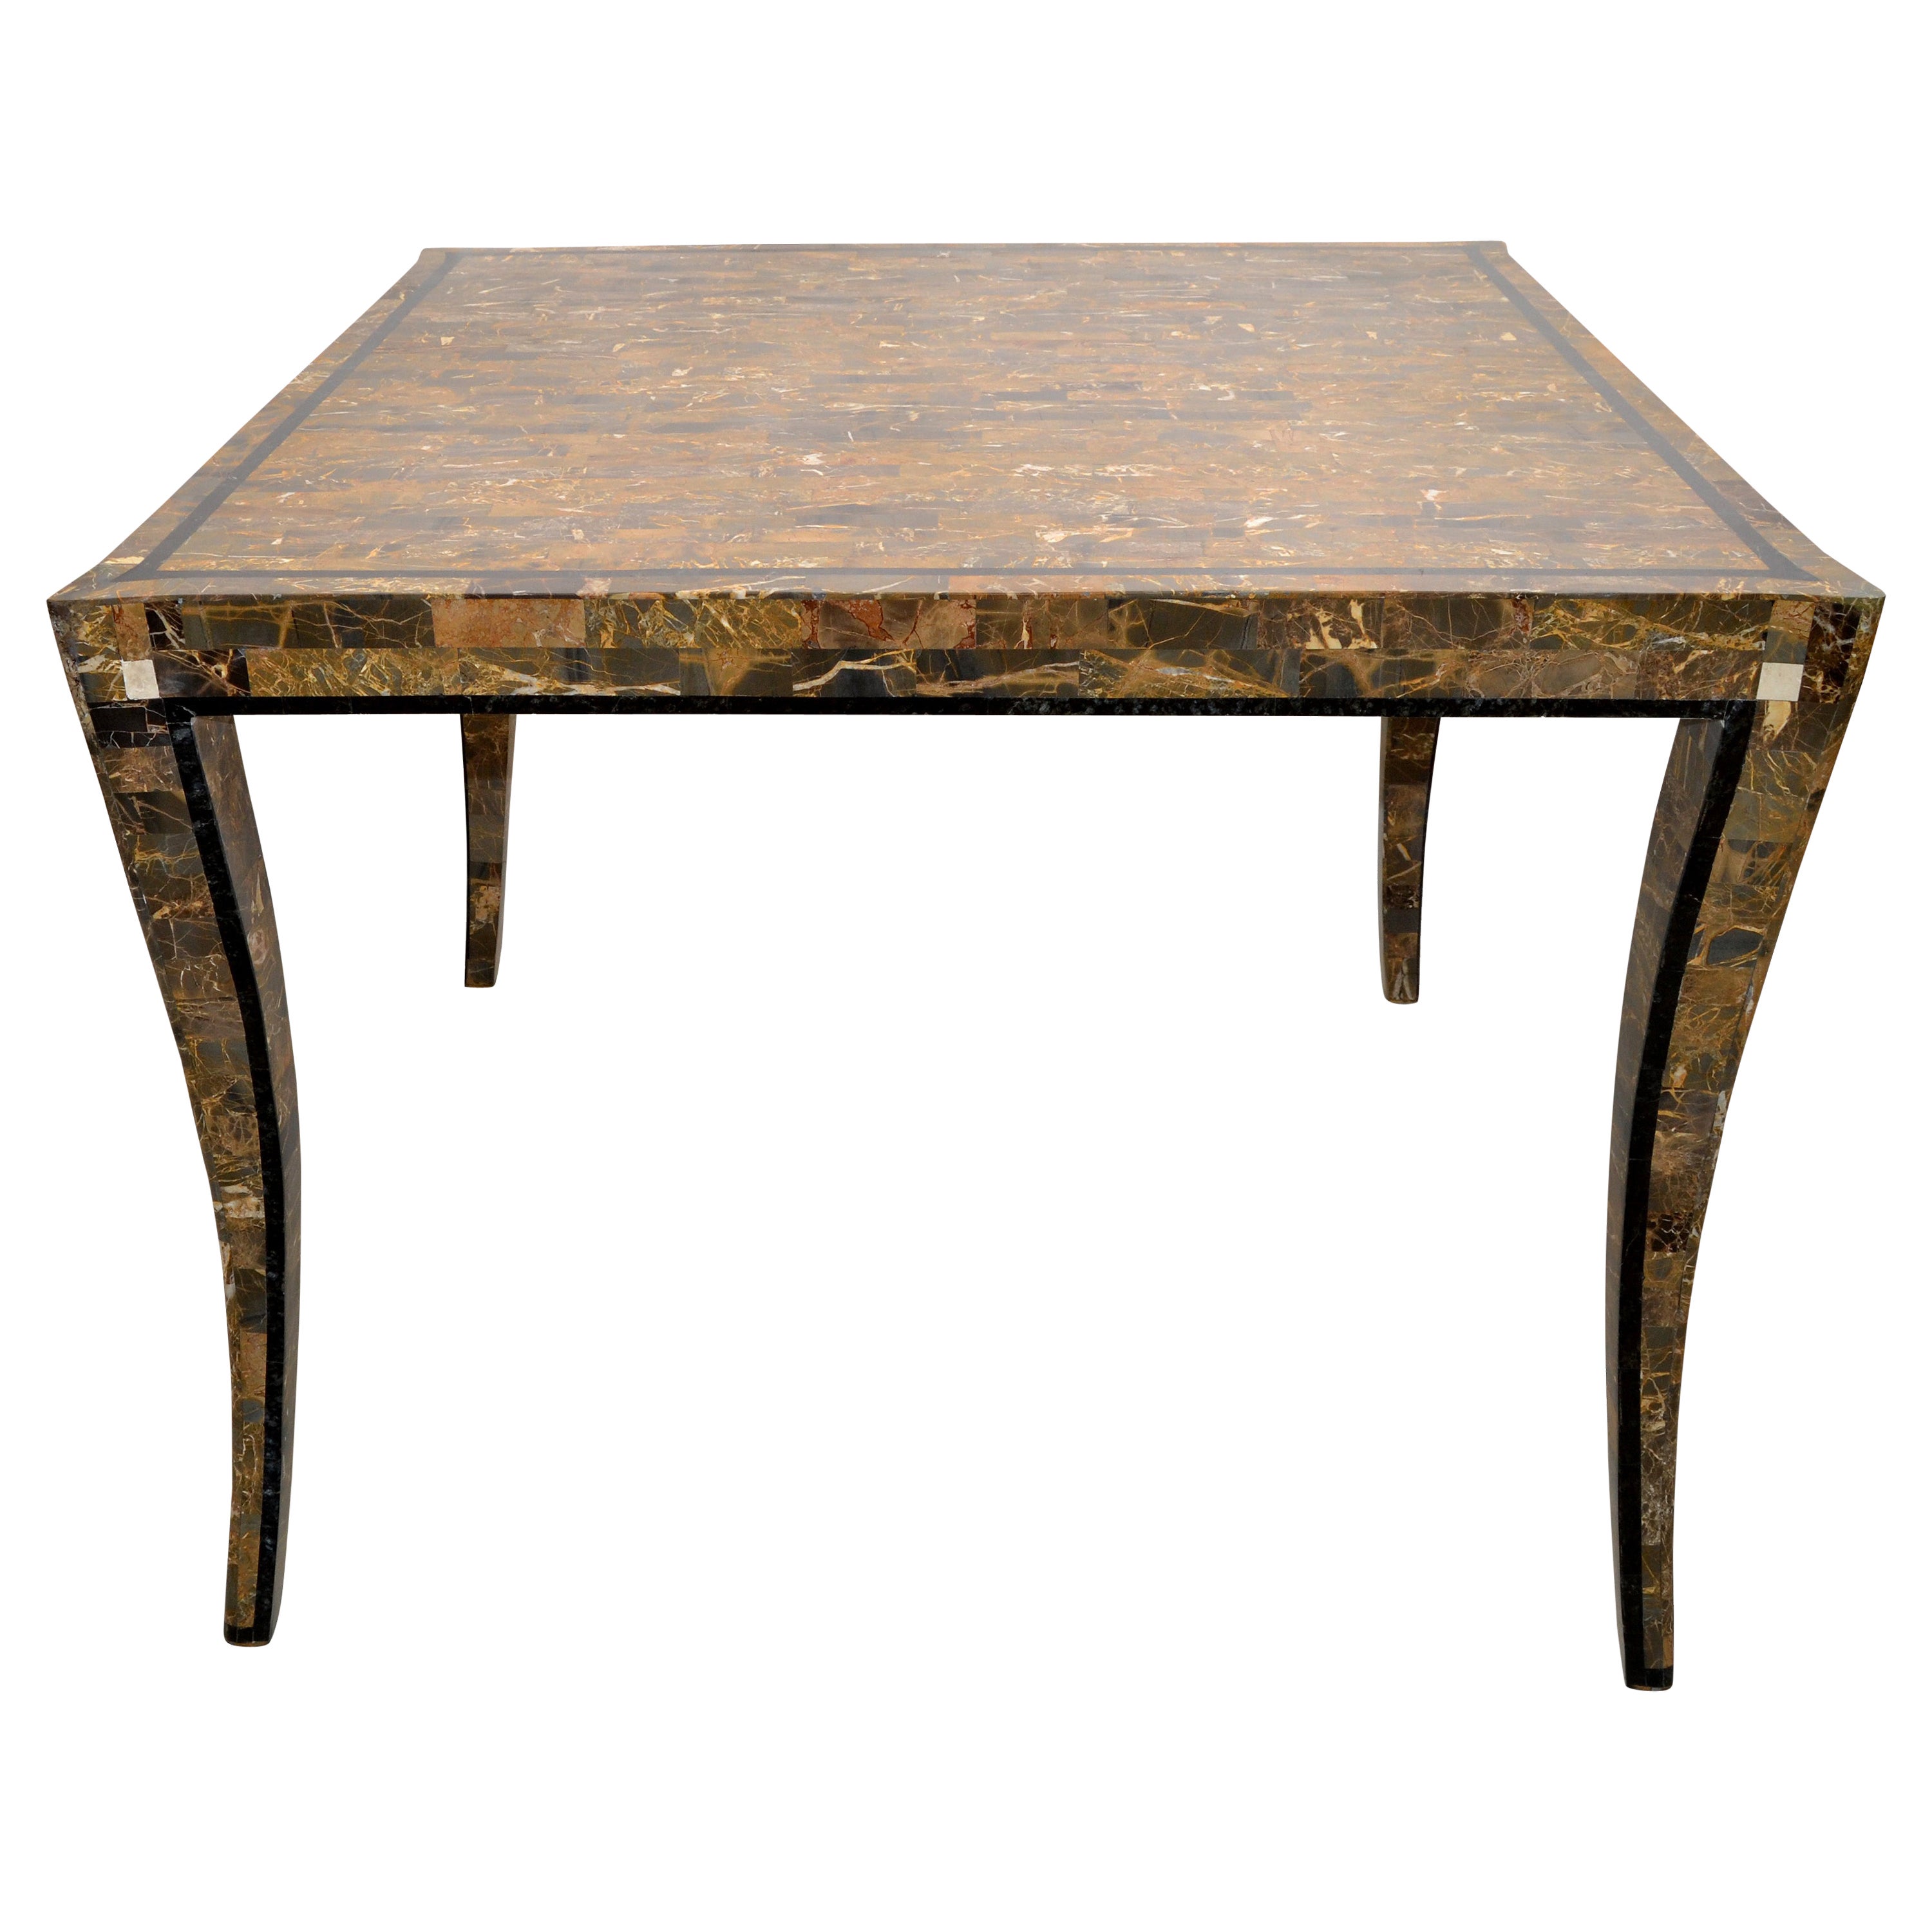 Maitland Smith Style Tessellated Stone over Wood Square Game Table Curved Legs